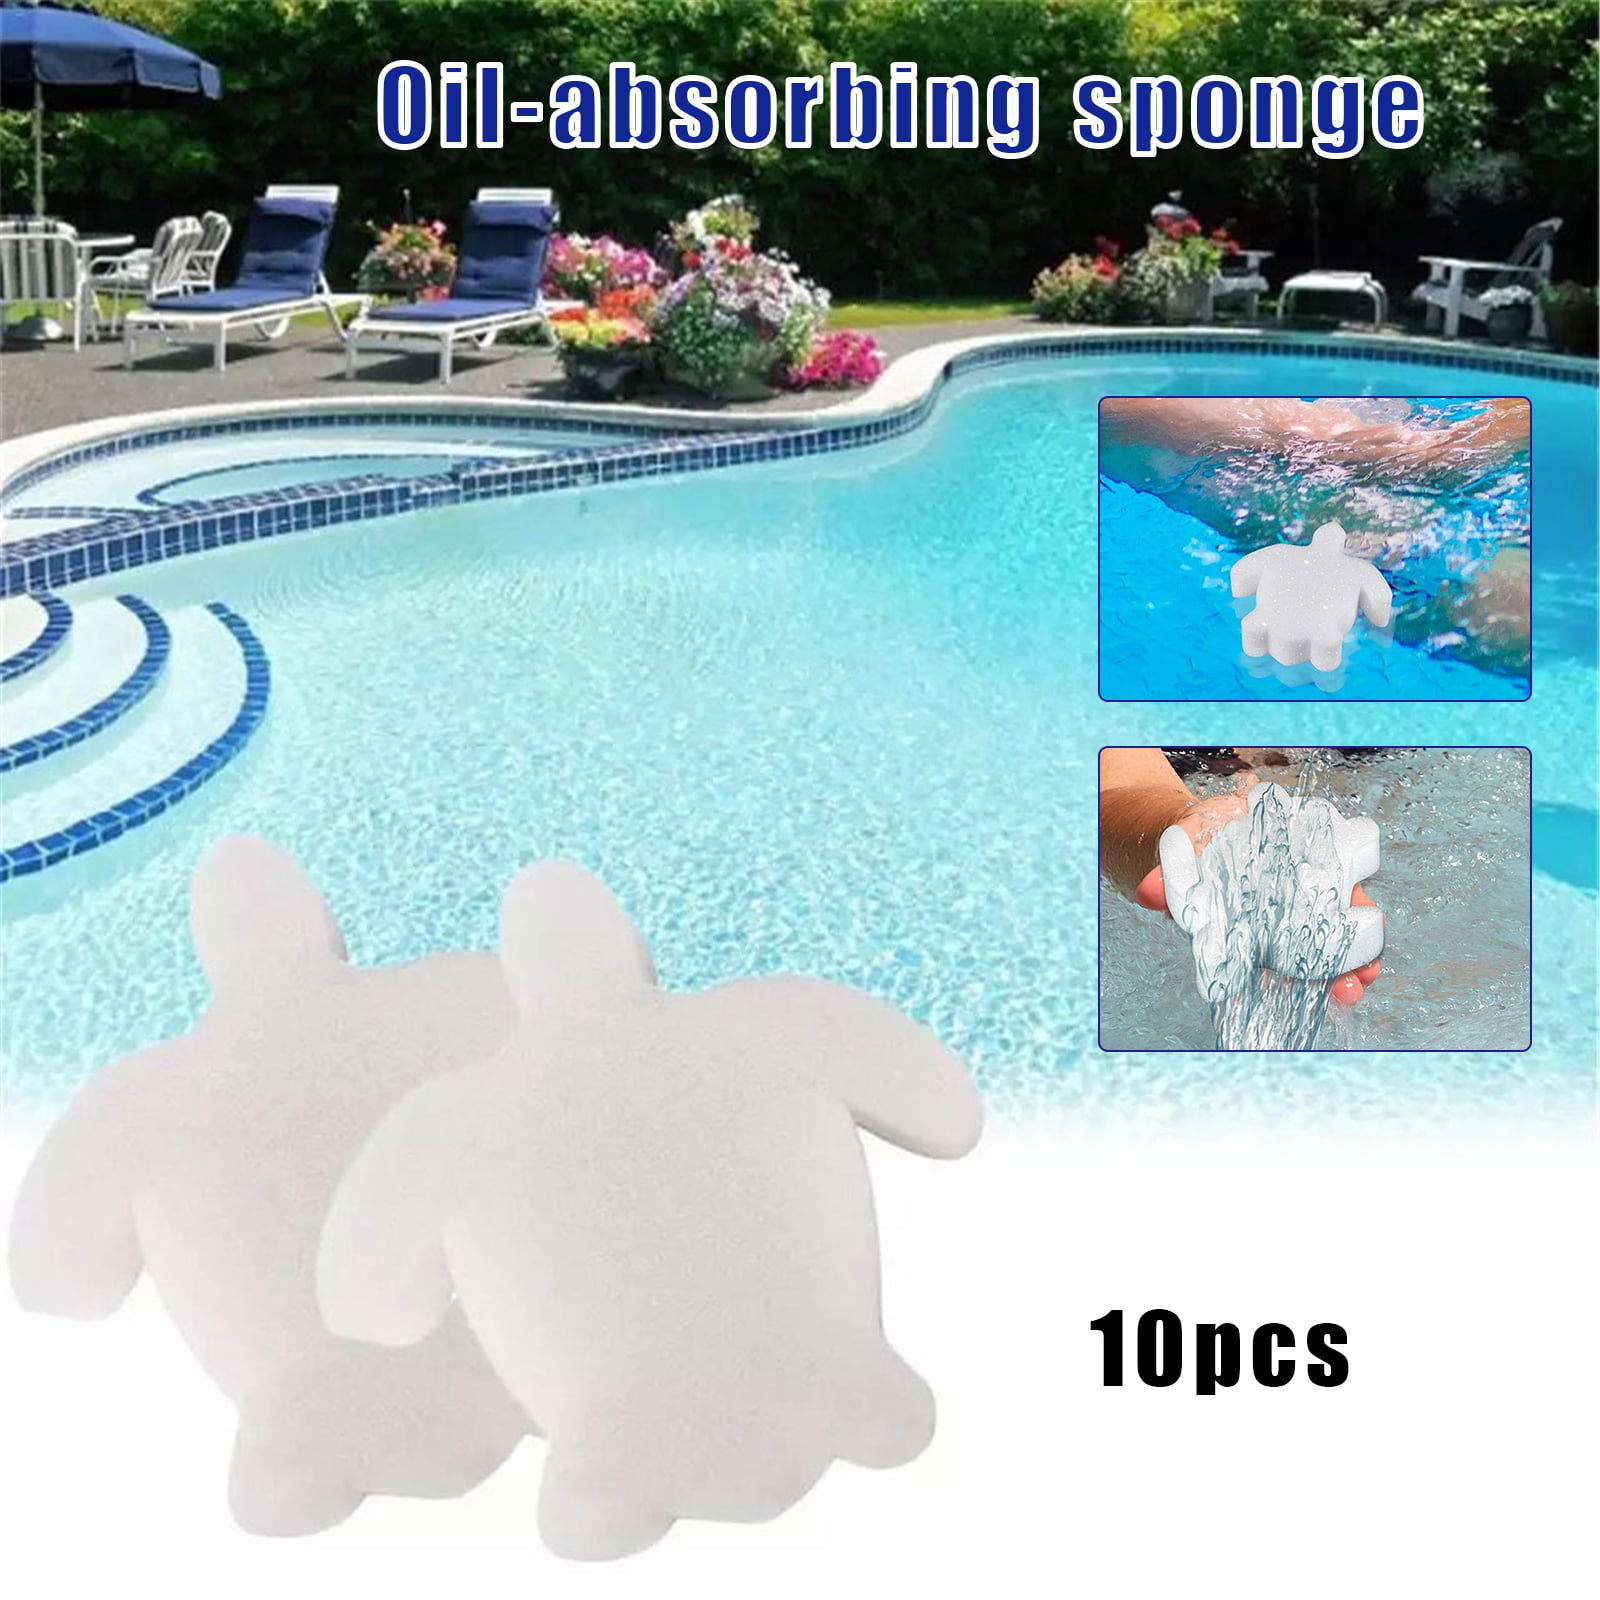 Scum Oil Absorbing Sponge for Pool Spa Hot Tub Easy to Use 3 Pack Star Shape New 